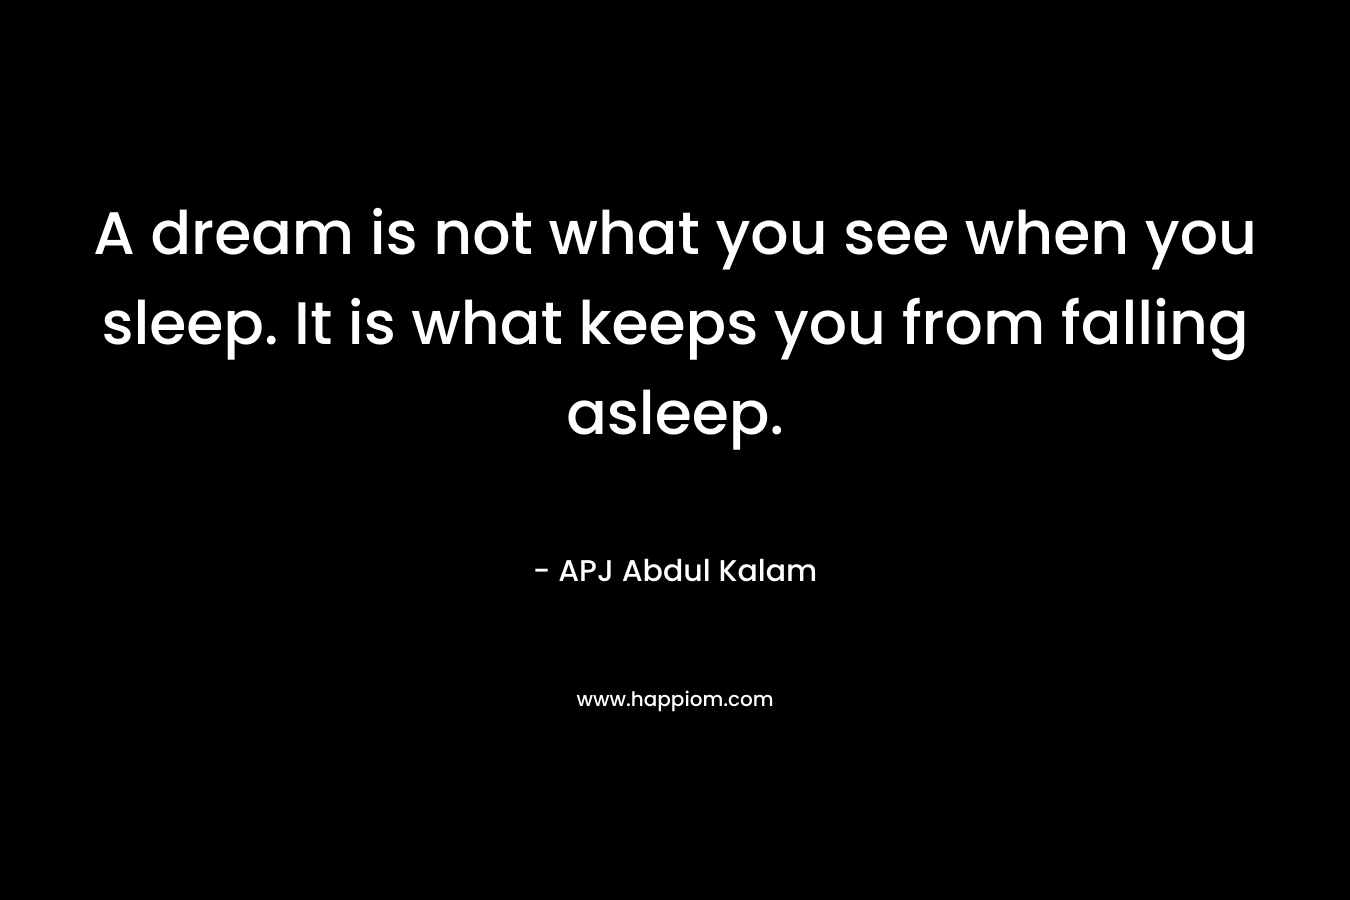 A dream is not what you see when you sleep. It is what keeps you from falling asleep. – APJ Abdul Kalam